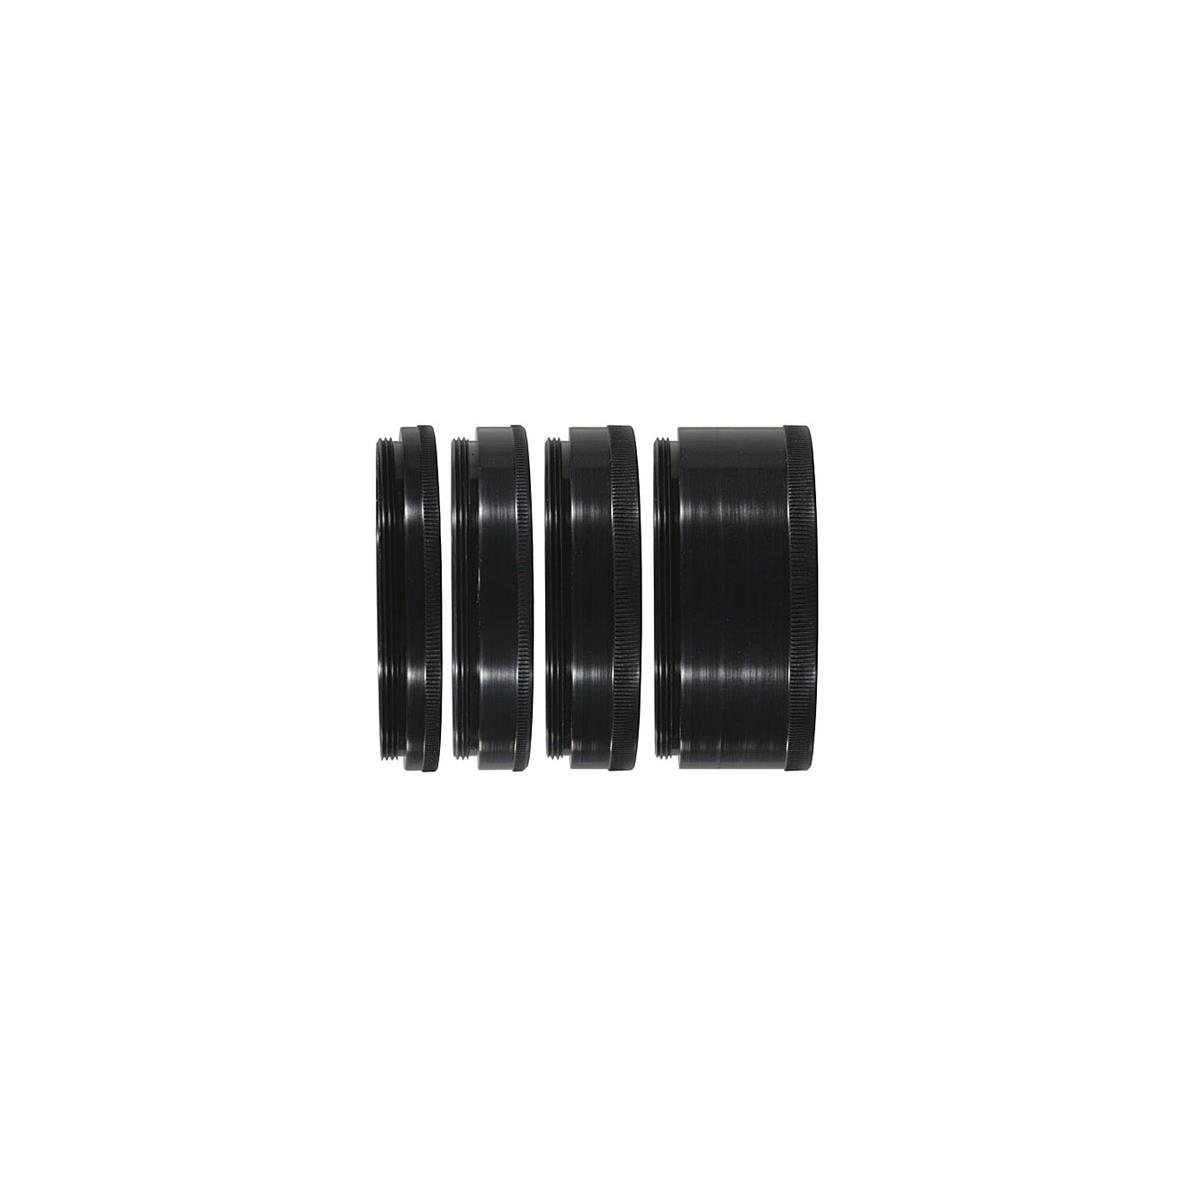 Image of Tele Vue TLS2245 Accessory Tube Spacers